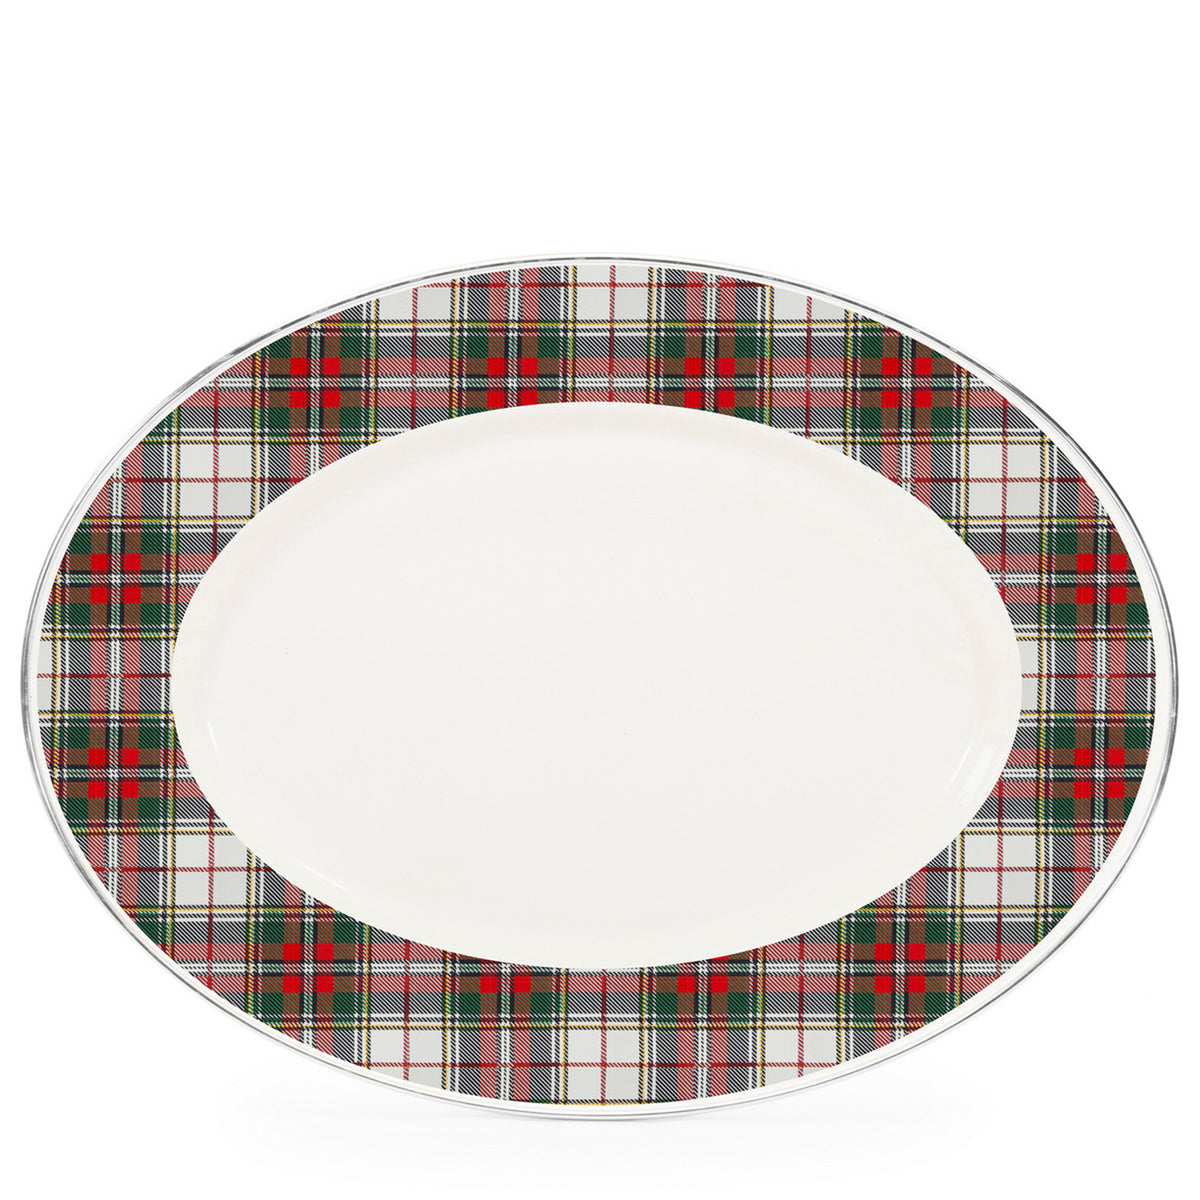 Oval Platter in Highland Plaid